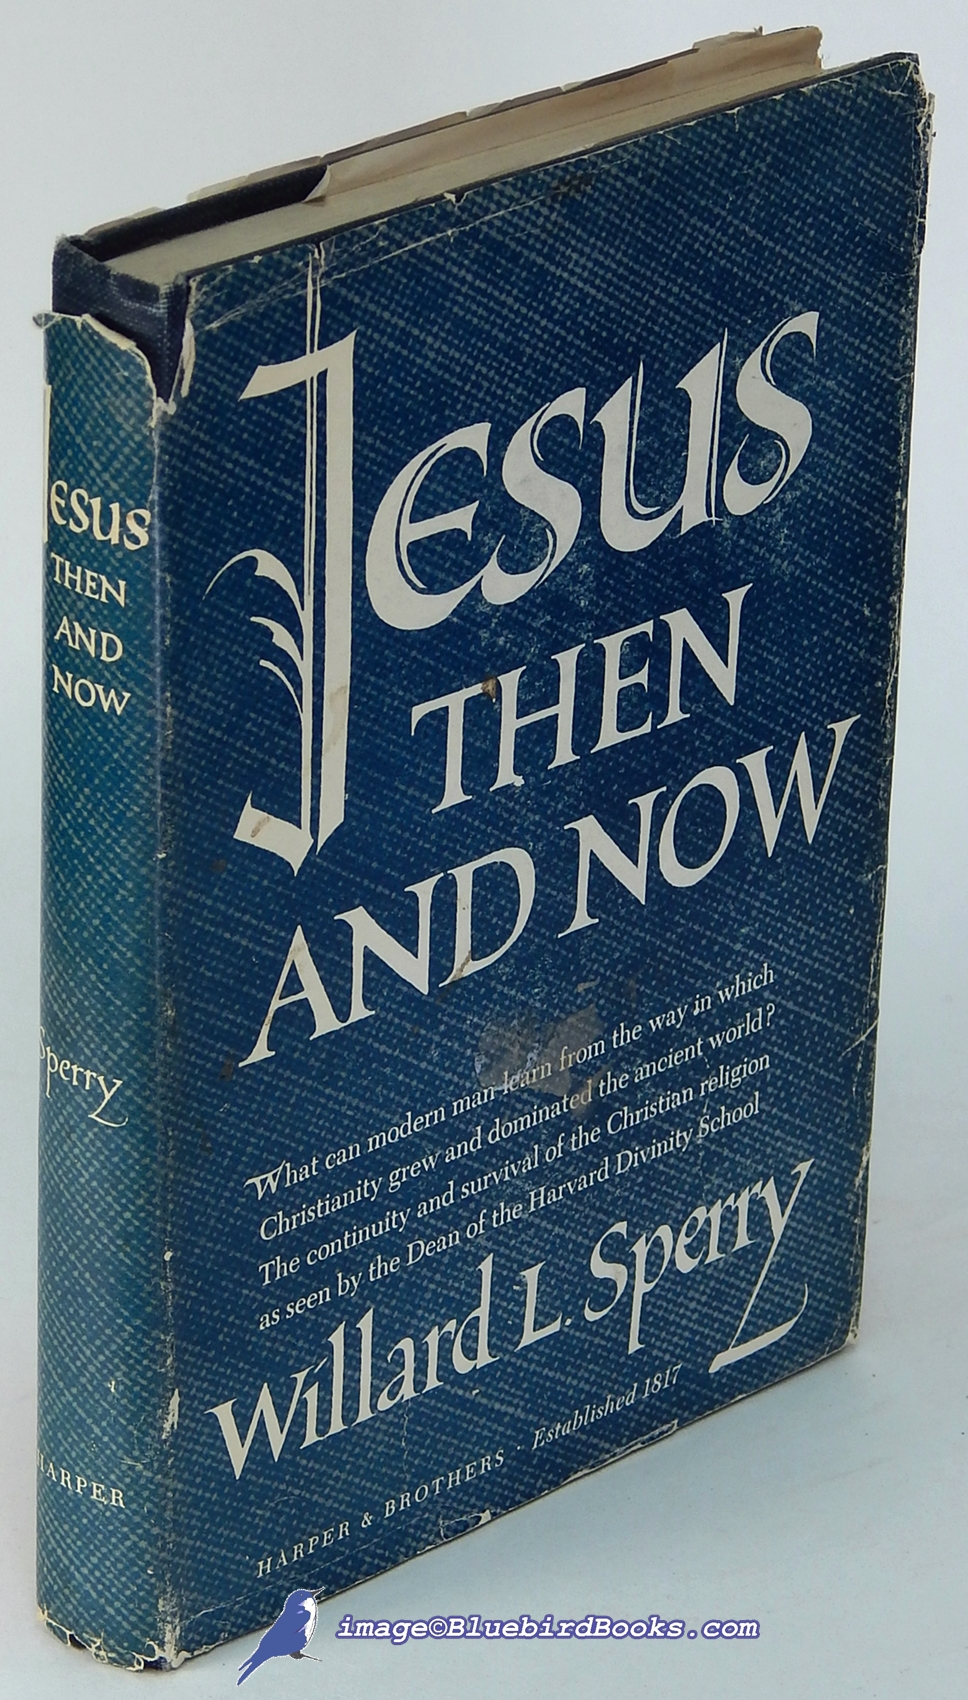 SPERRY, WILLARD L. - Jesus Then and Now: Thoughts on the Continuity and Survival of the Christian Religion